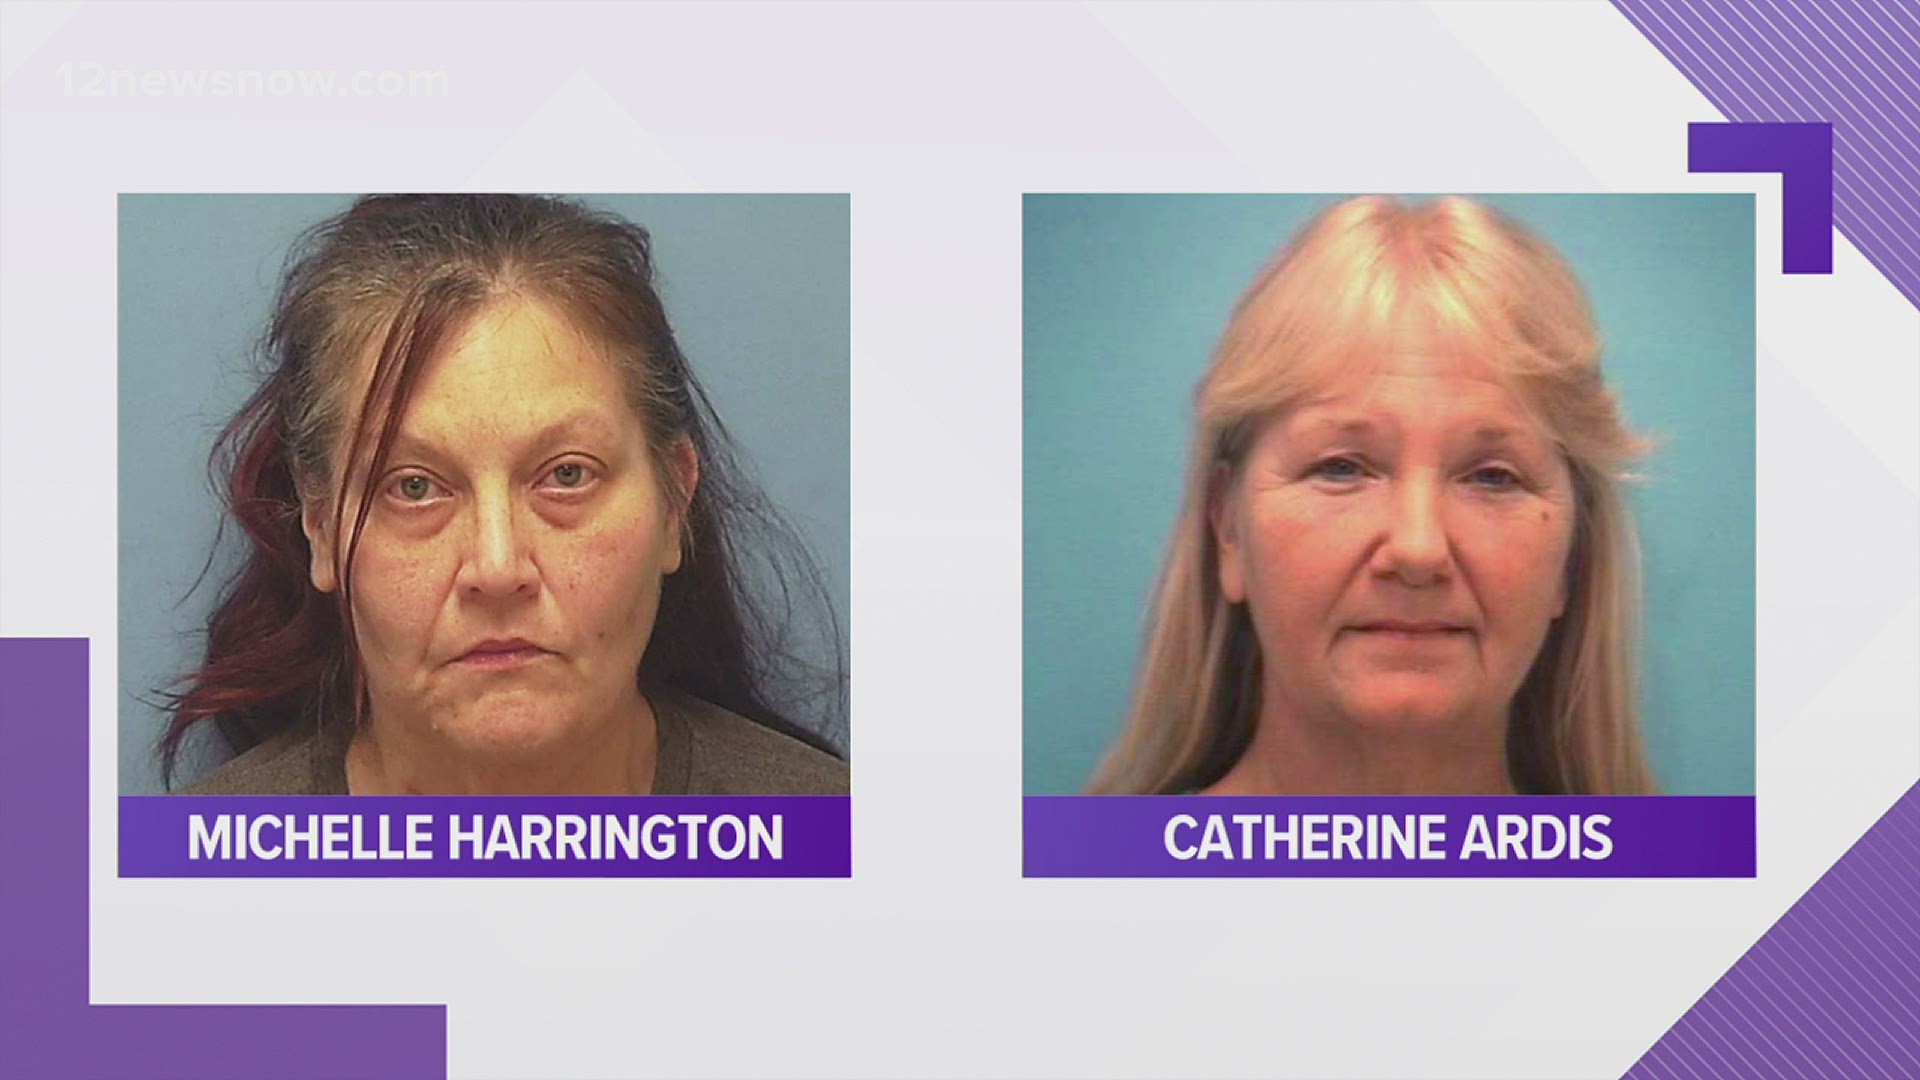 Michelle Harrington pleaded guilty to conspiracy to distribute a controlled substance after renting out a house to three people, including Catherine Ardis, 62.